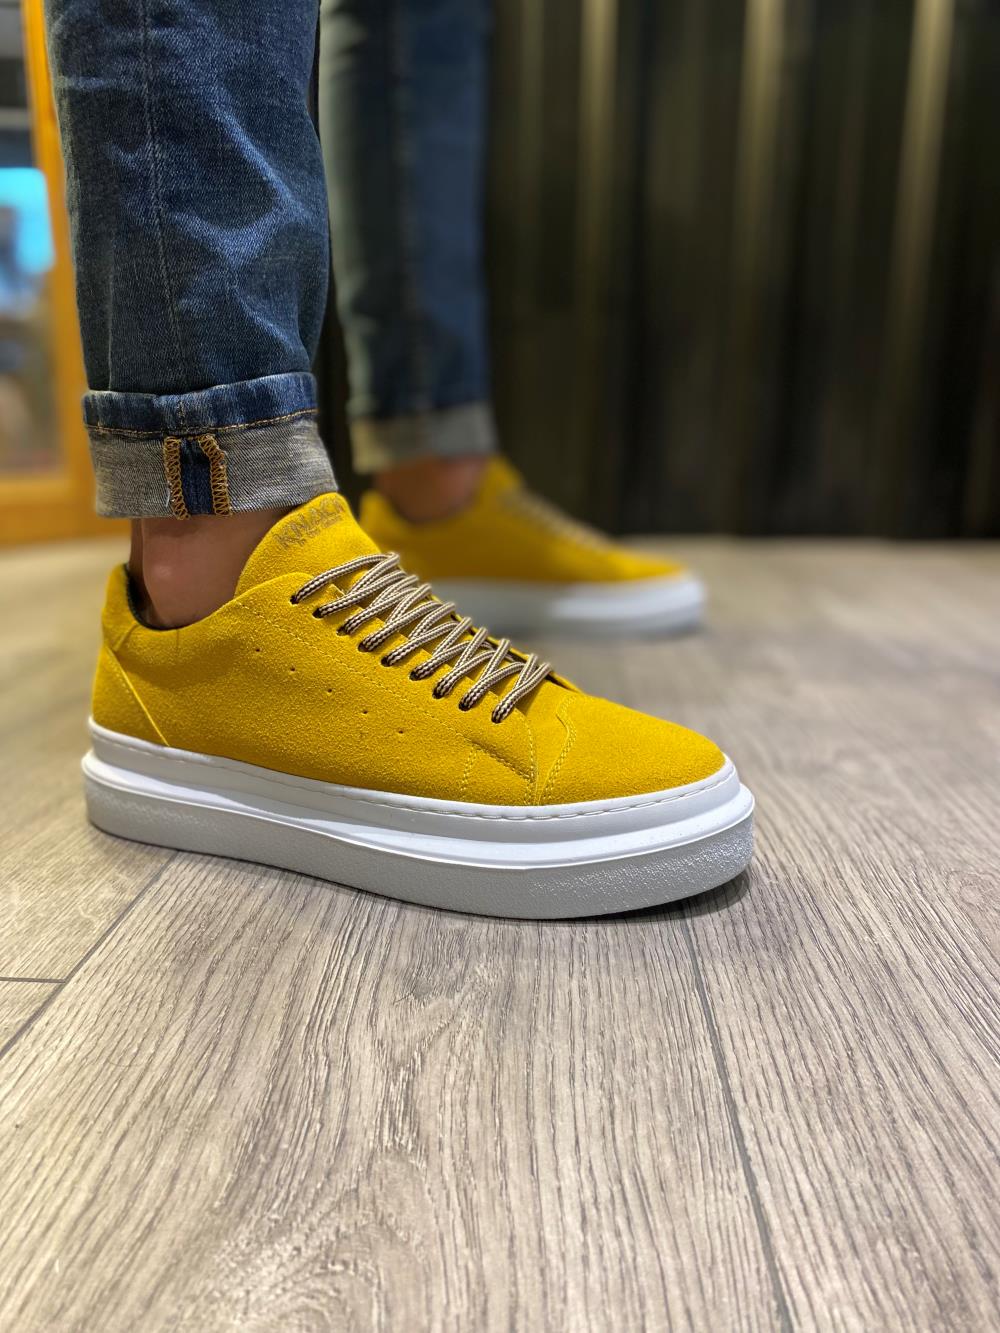 STM Men's Casual Sneakers Shoes 421 Yellow - STREETMODE™